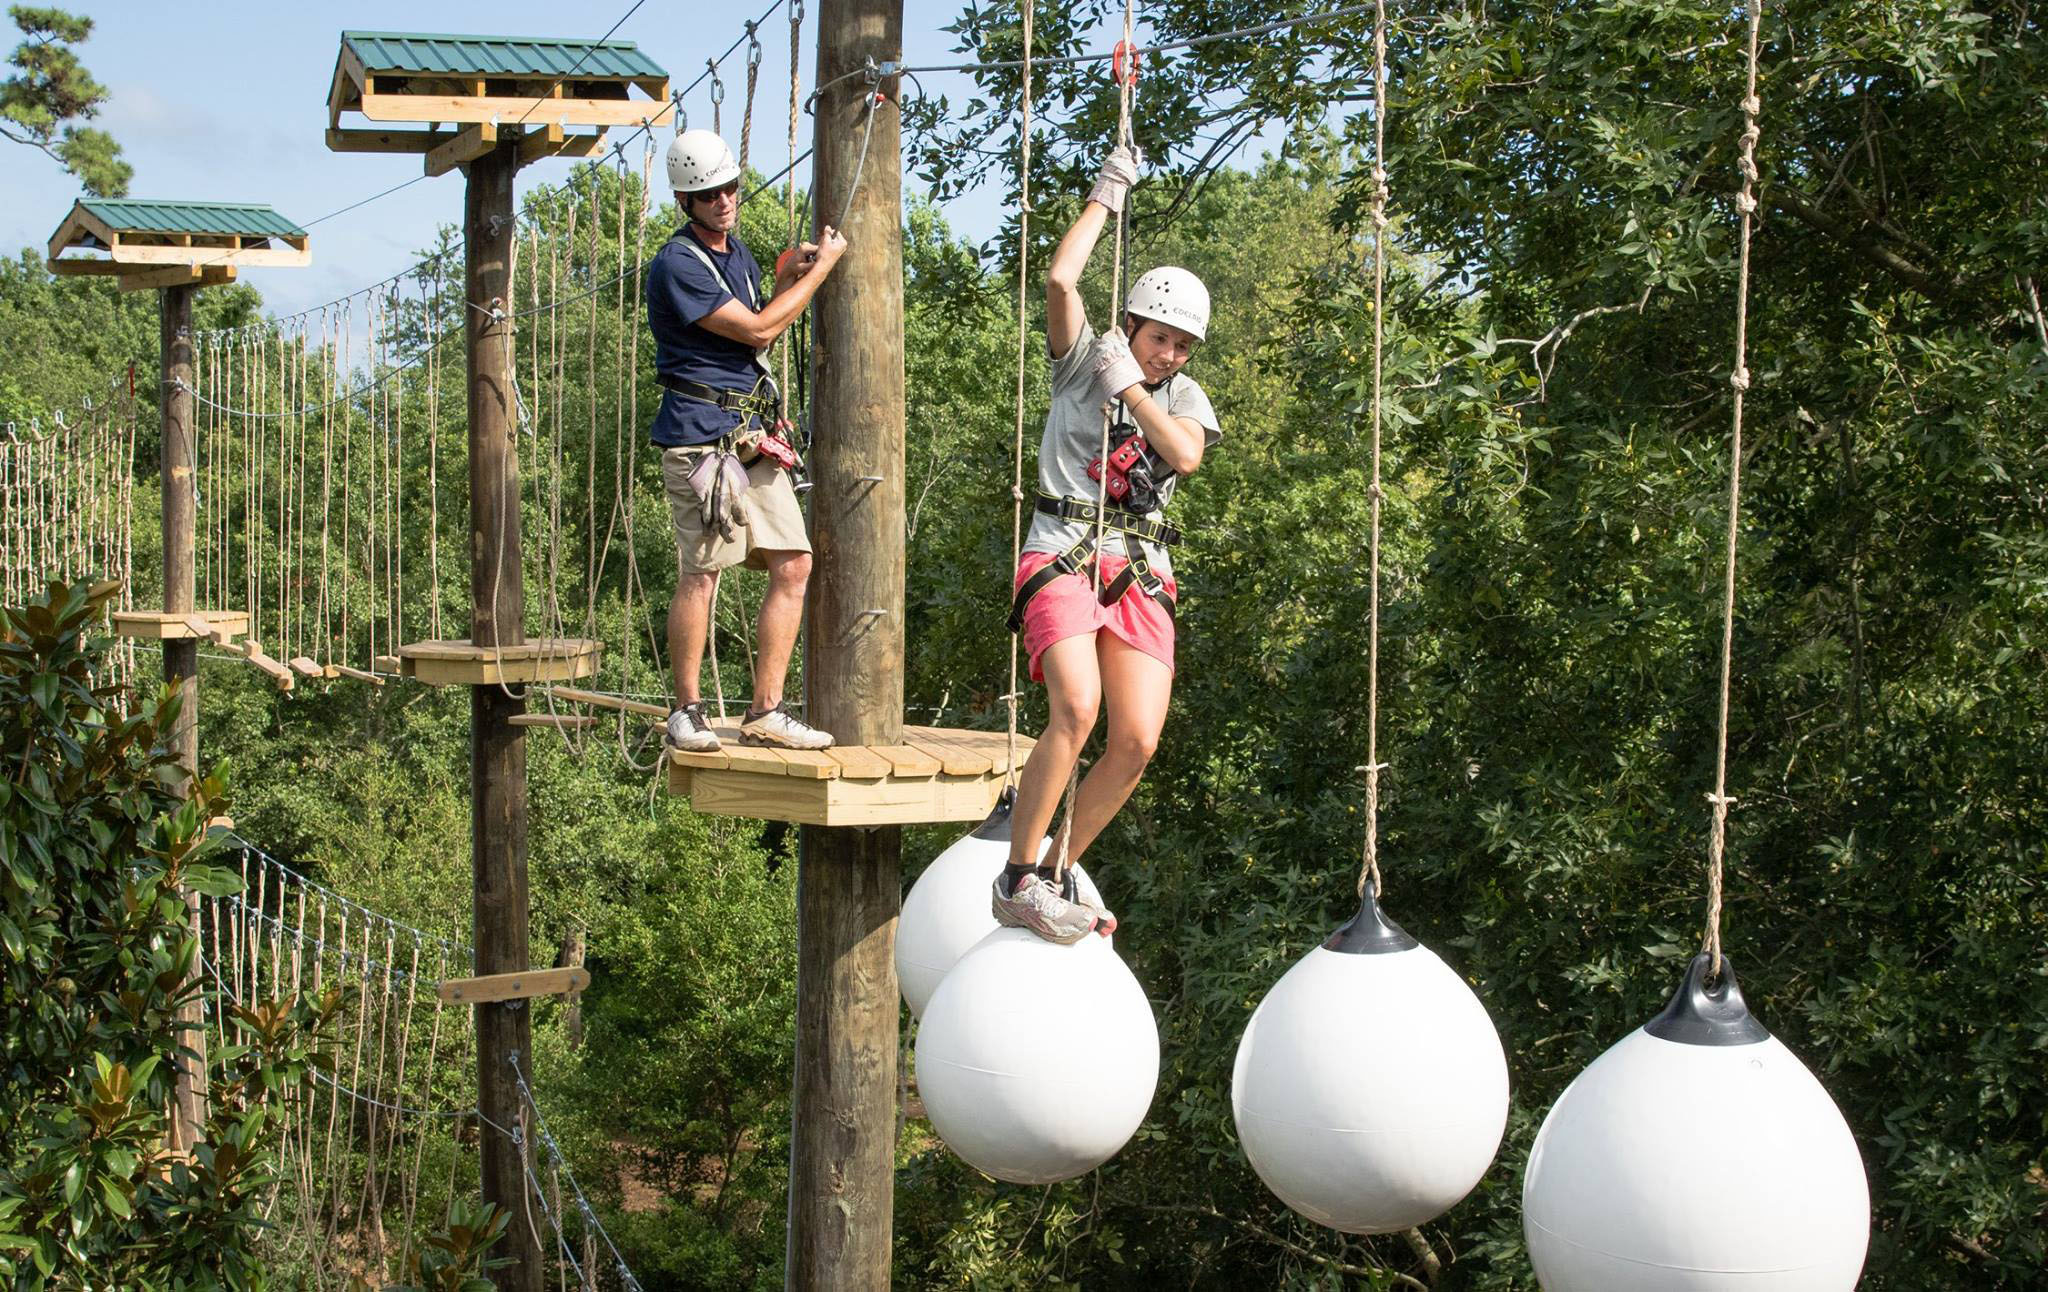 Radical Ropes Adventure Park now open in Myrtle Beach